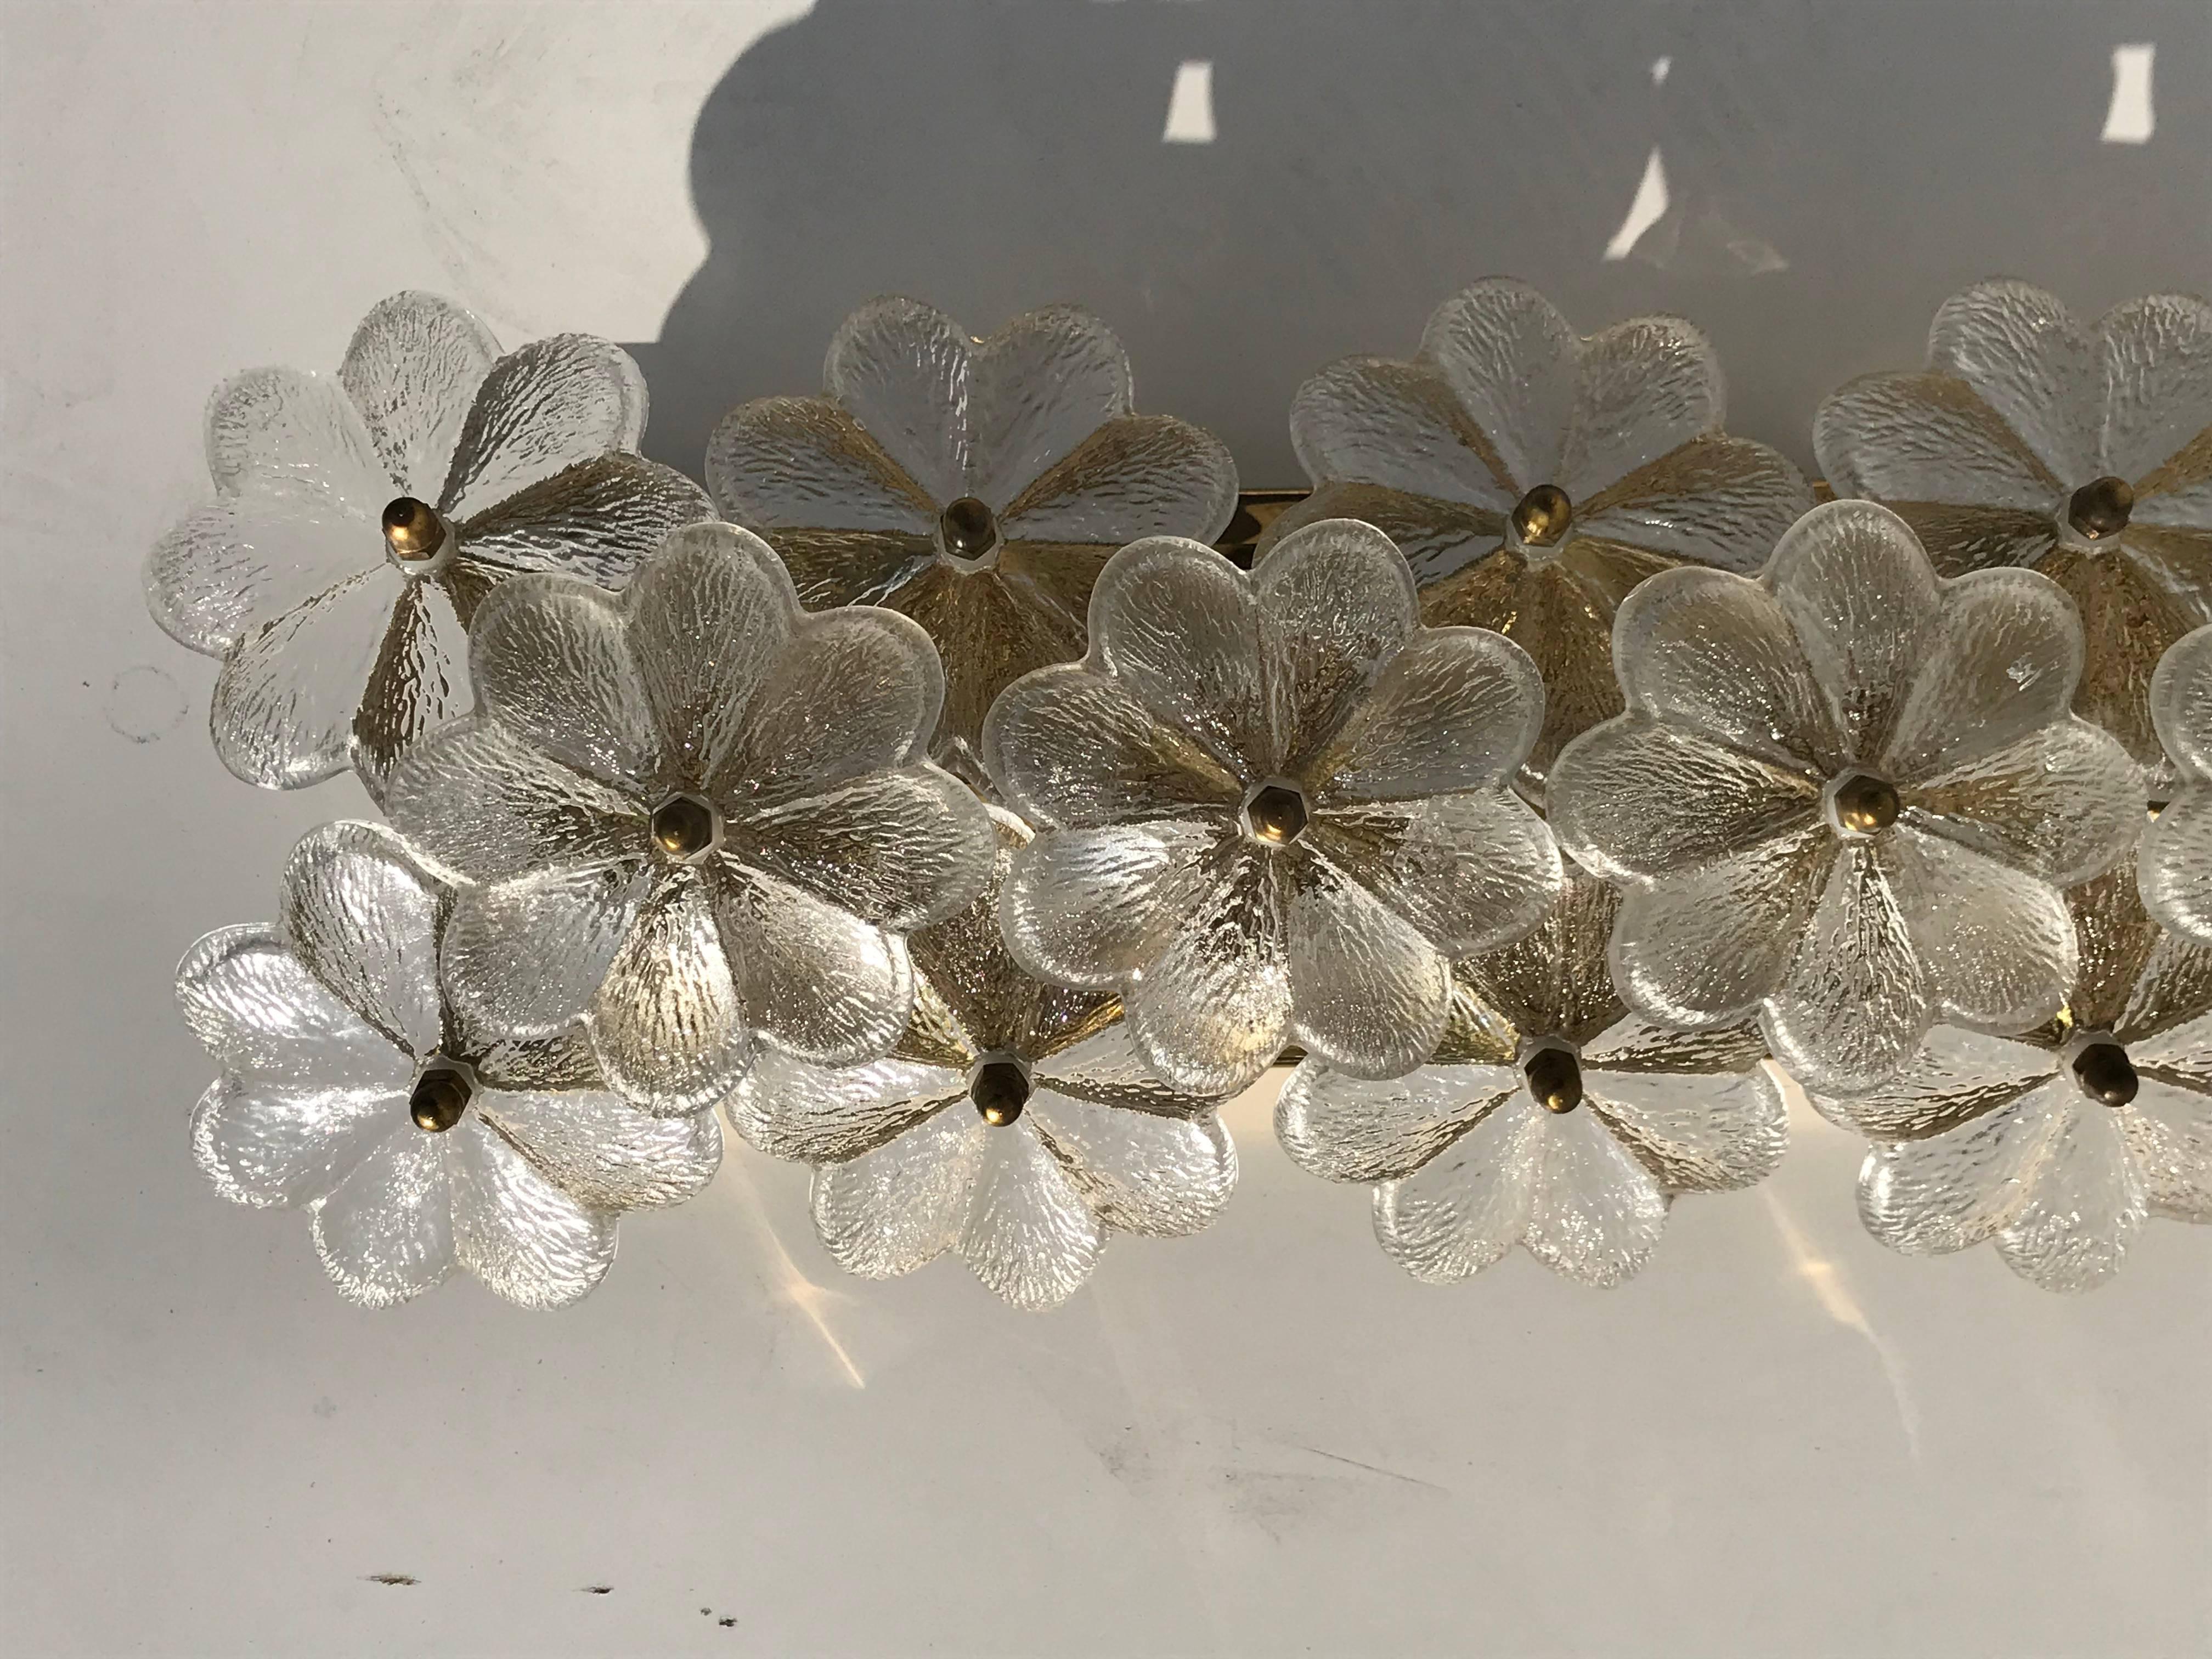 Ernst Palme floral glass and brass rectangular wall sconce
It uses four E14 base bulbs up to 60 watt each bulb.